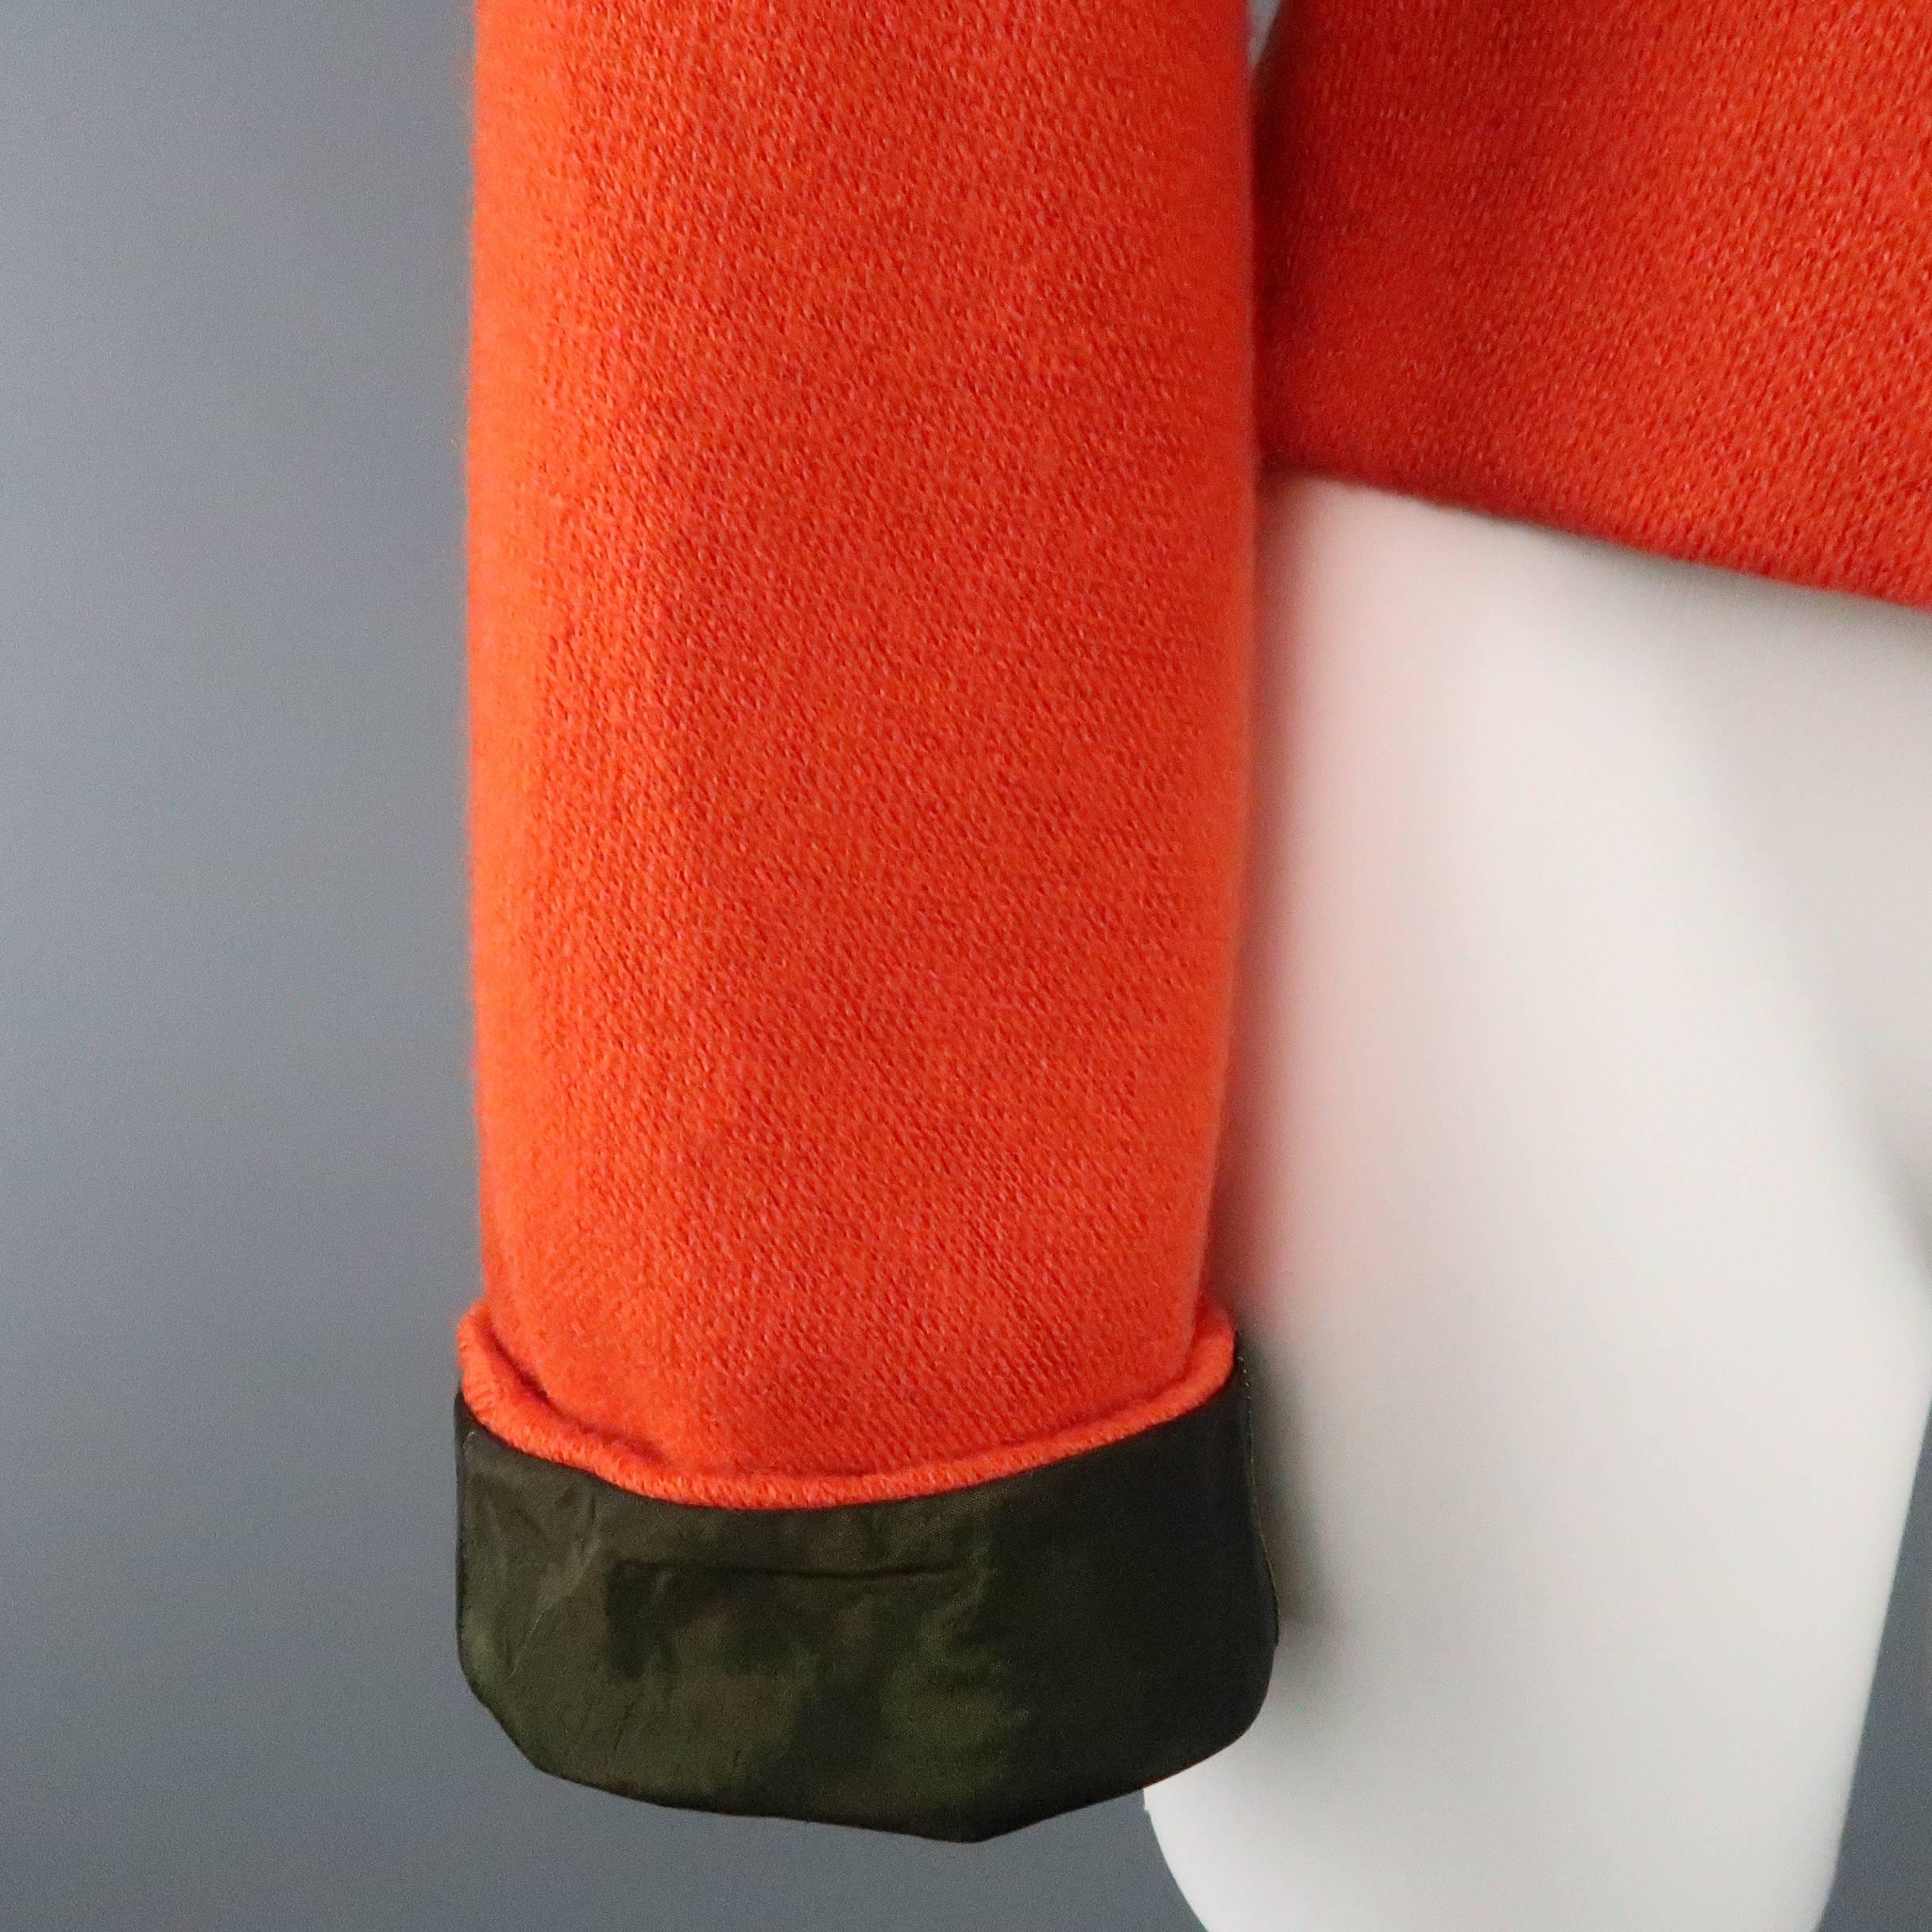 KRIZIA jacket comes in an bold orange mohair and wool blend knit and features a round, collarless neckline, hidden zip front, and long sleeves with olive green satin liner. Made in Italy.
 
Excellent Pre-Owned Condition.
Marked: IT 44
